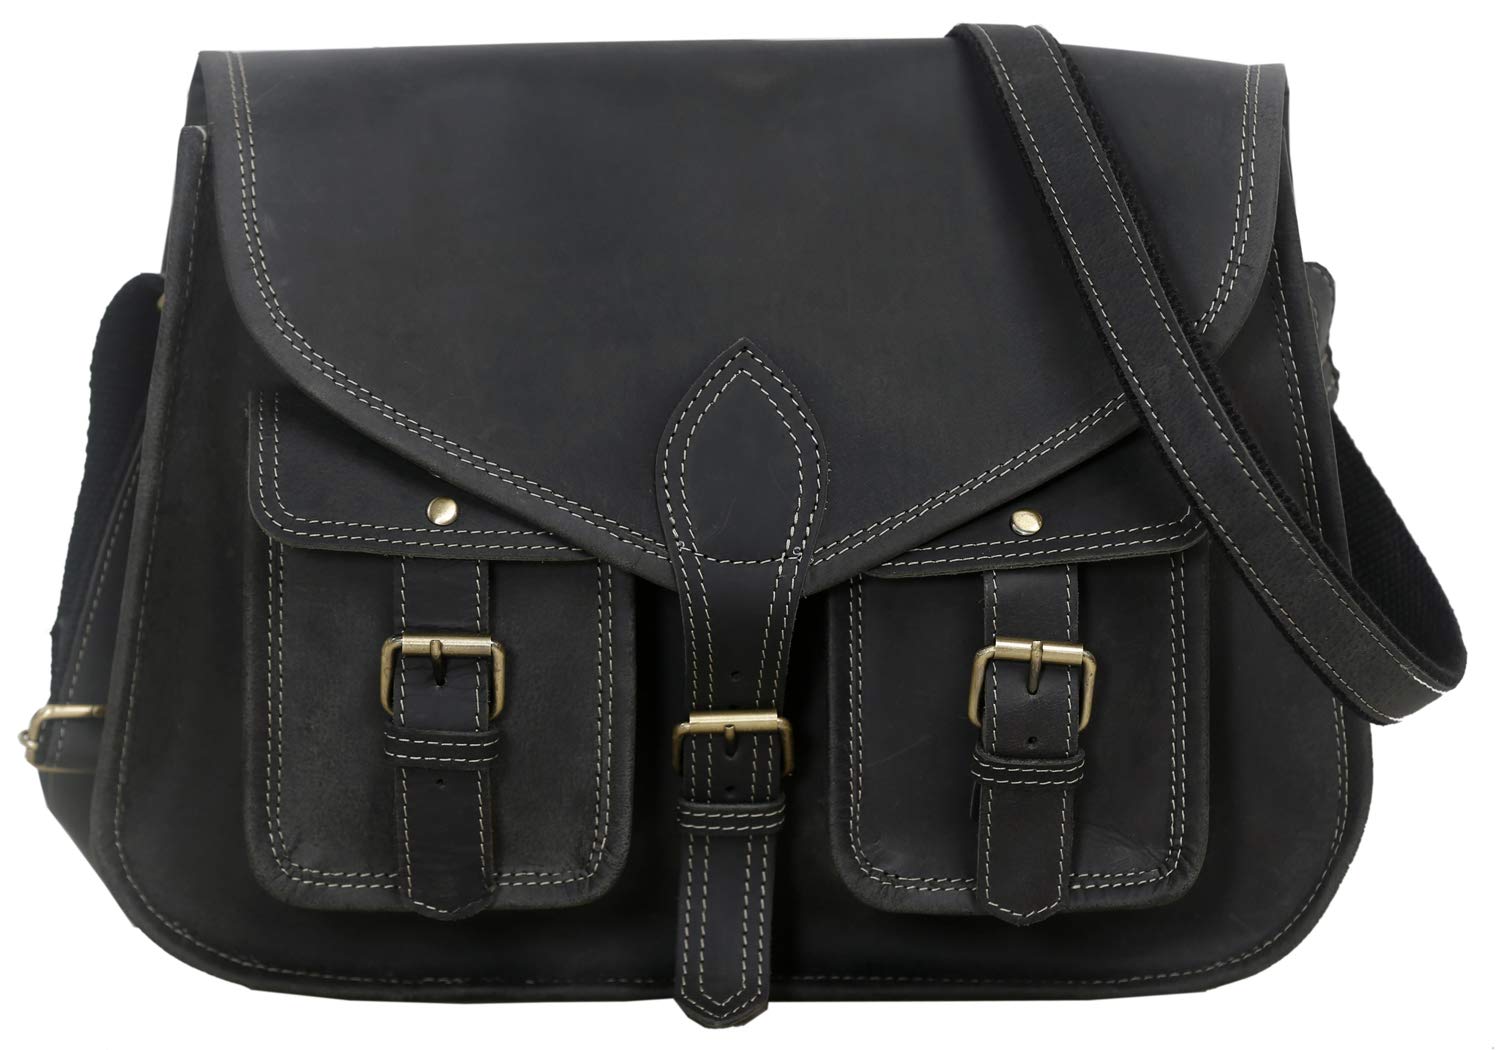 Luxury Designer Black Embossed Leather Pochette Bag With S Lock Closure For  Women East West Metis Messenger Miniso Shoulder Bags, Letter Ladies Purse,  And Crossbody Wallet From Sogoodsbag, $51.82 | DHgate.Com